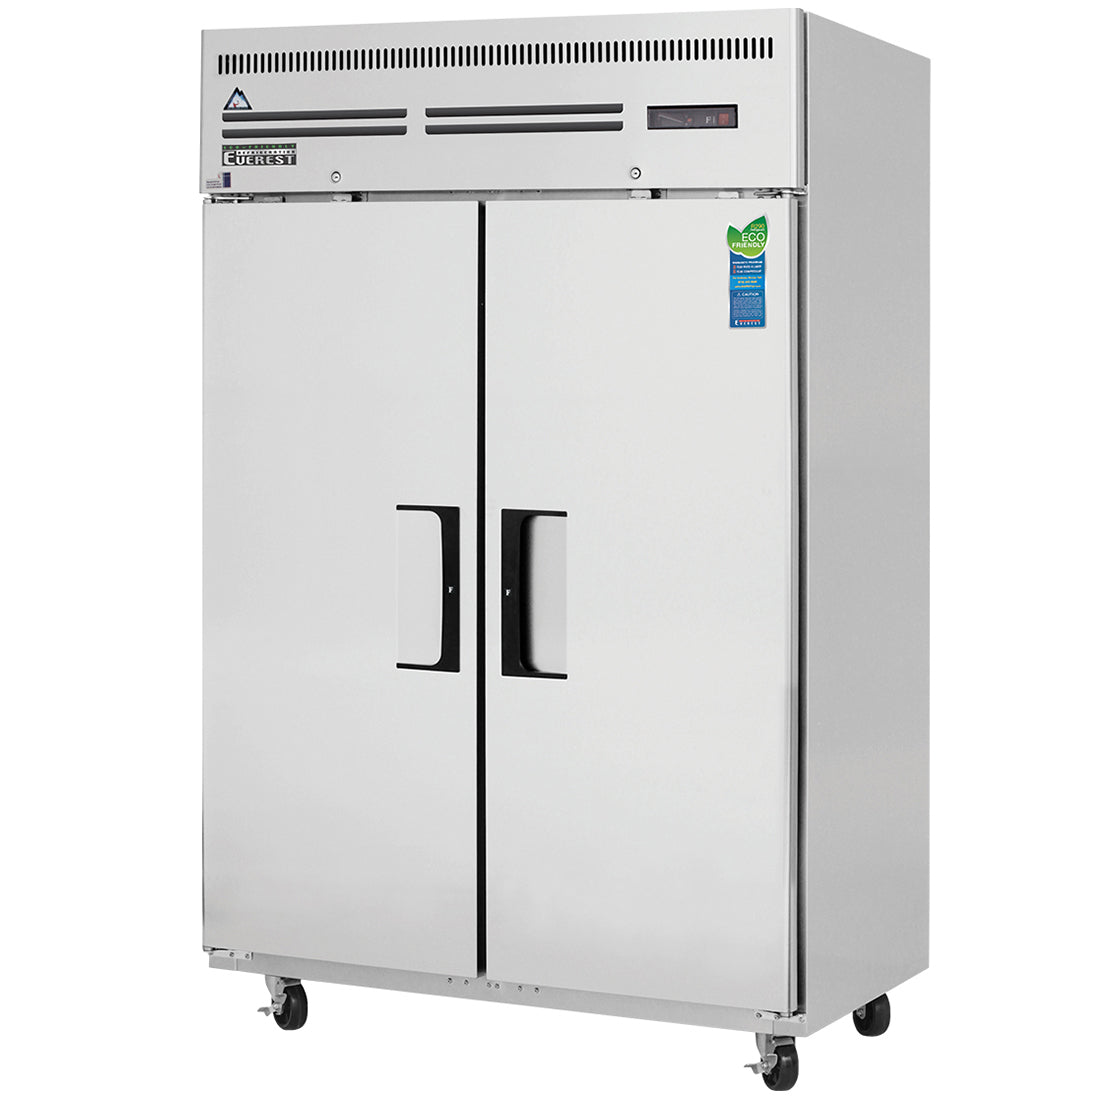 Everest ES Series-ESF2 Two Section Solid Door Upright Reach-In Freezer - 48 Cu. Ft.